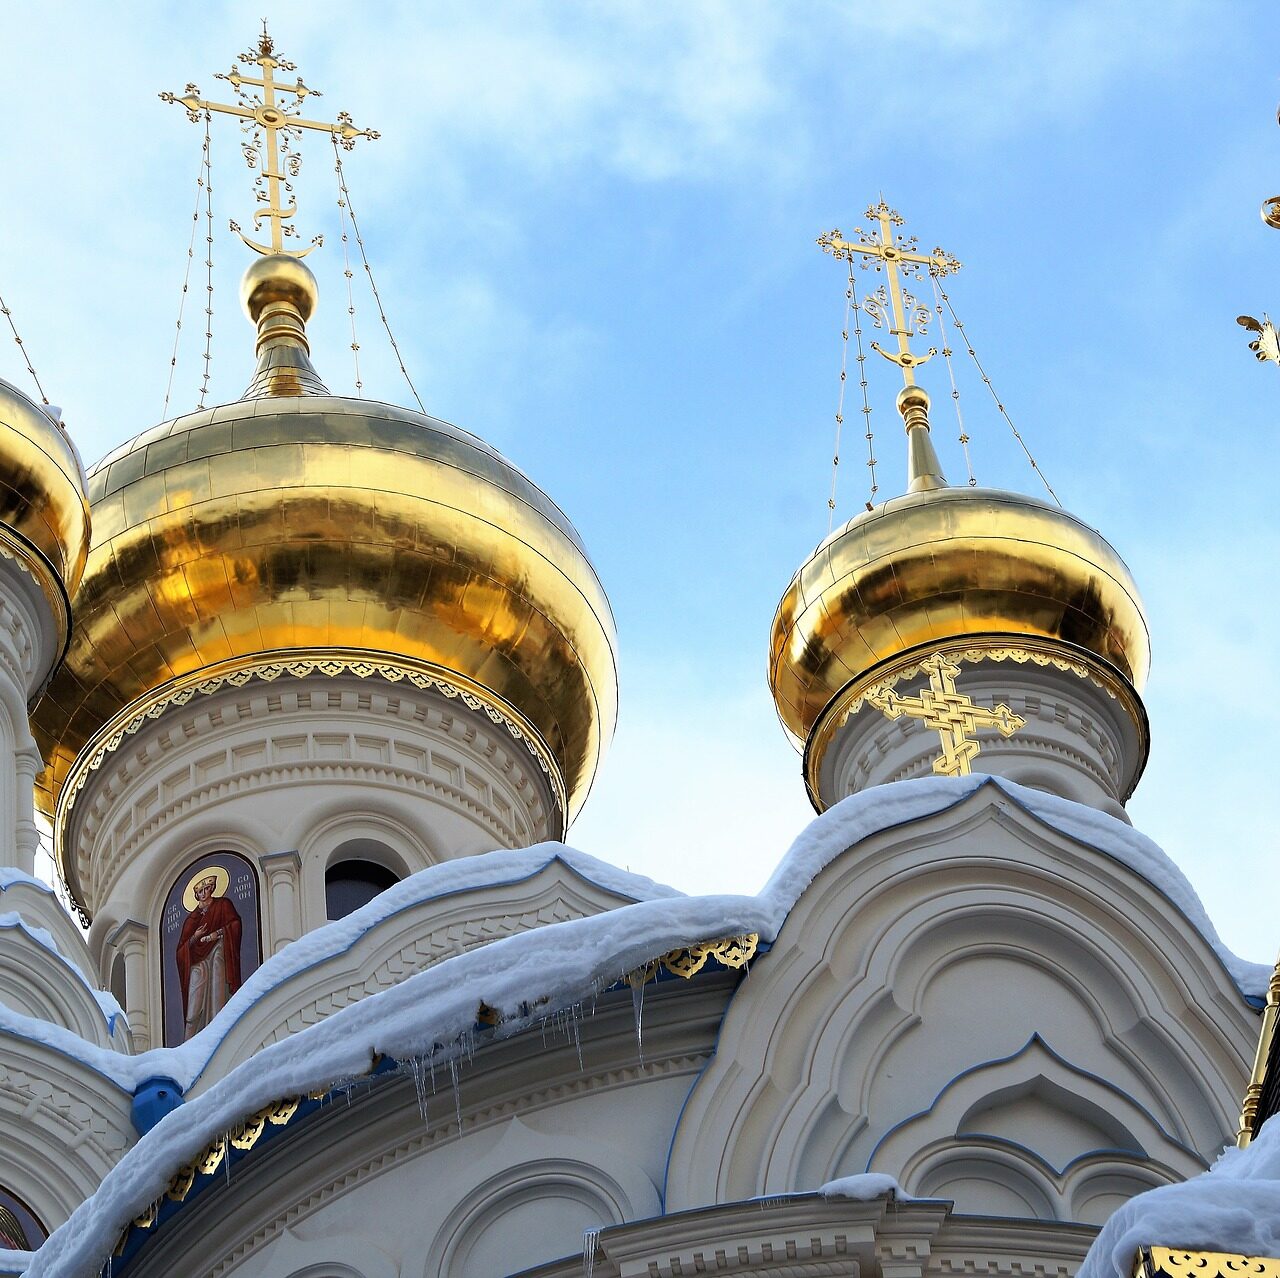 The spires of the Russian Orthodox Church in Karlovy Vary